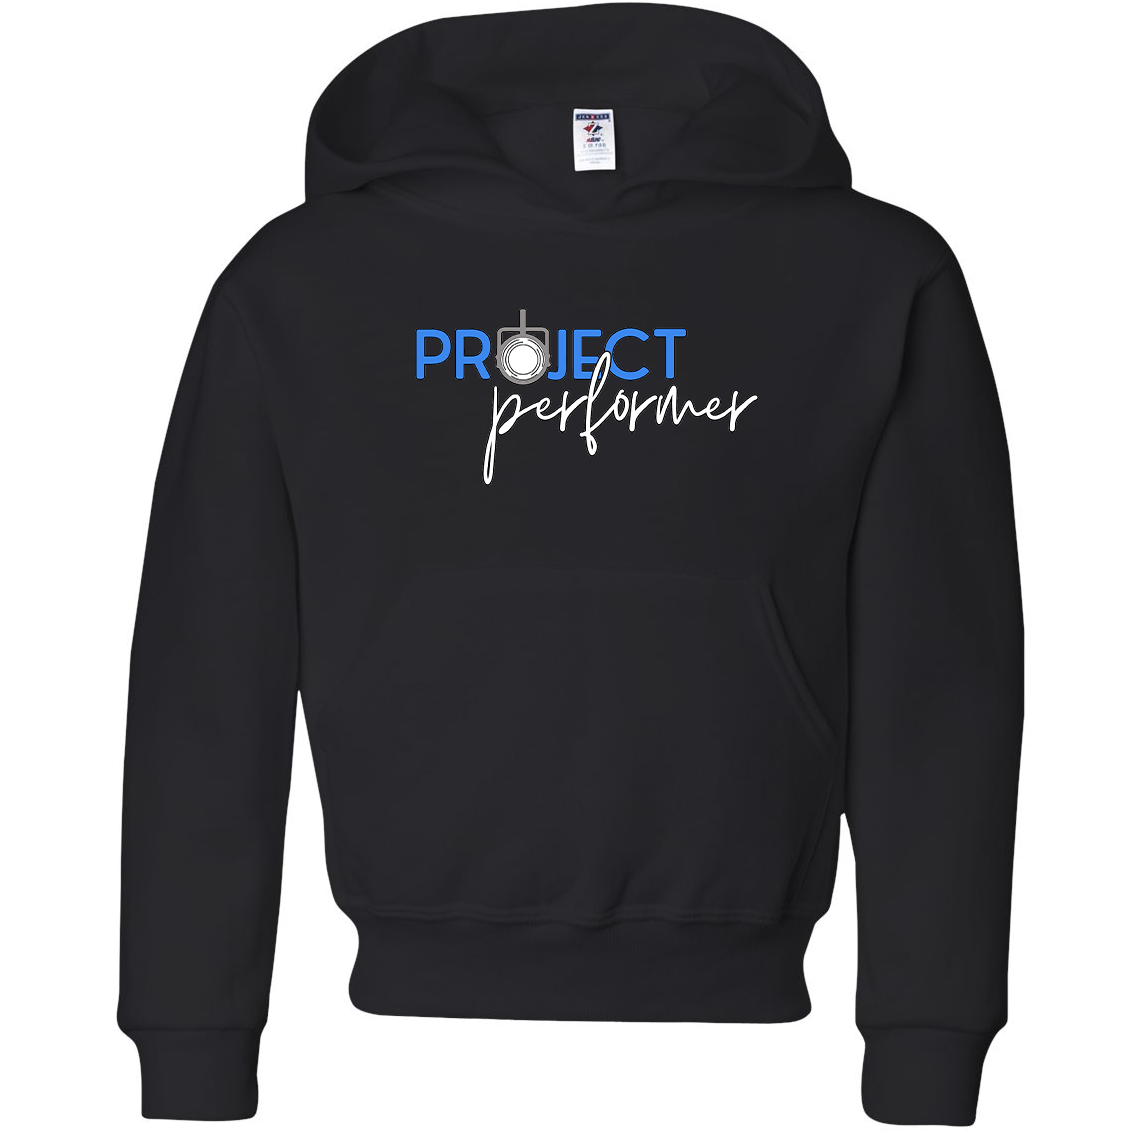 Project Performer Youth Hooded Sweatshirt